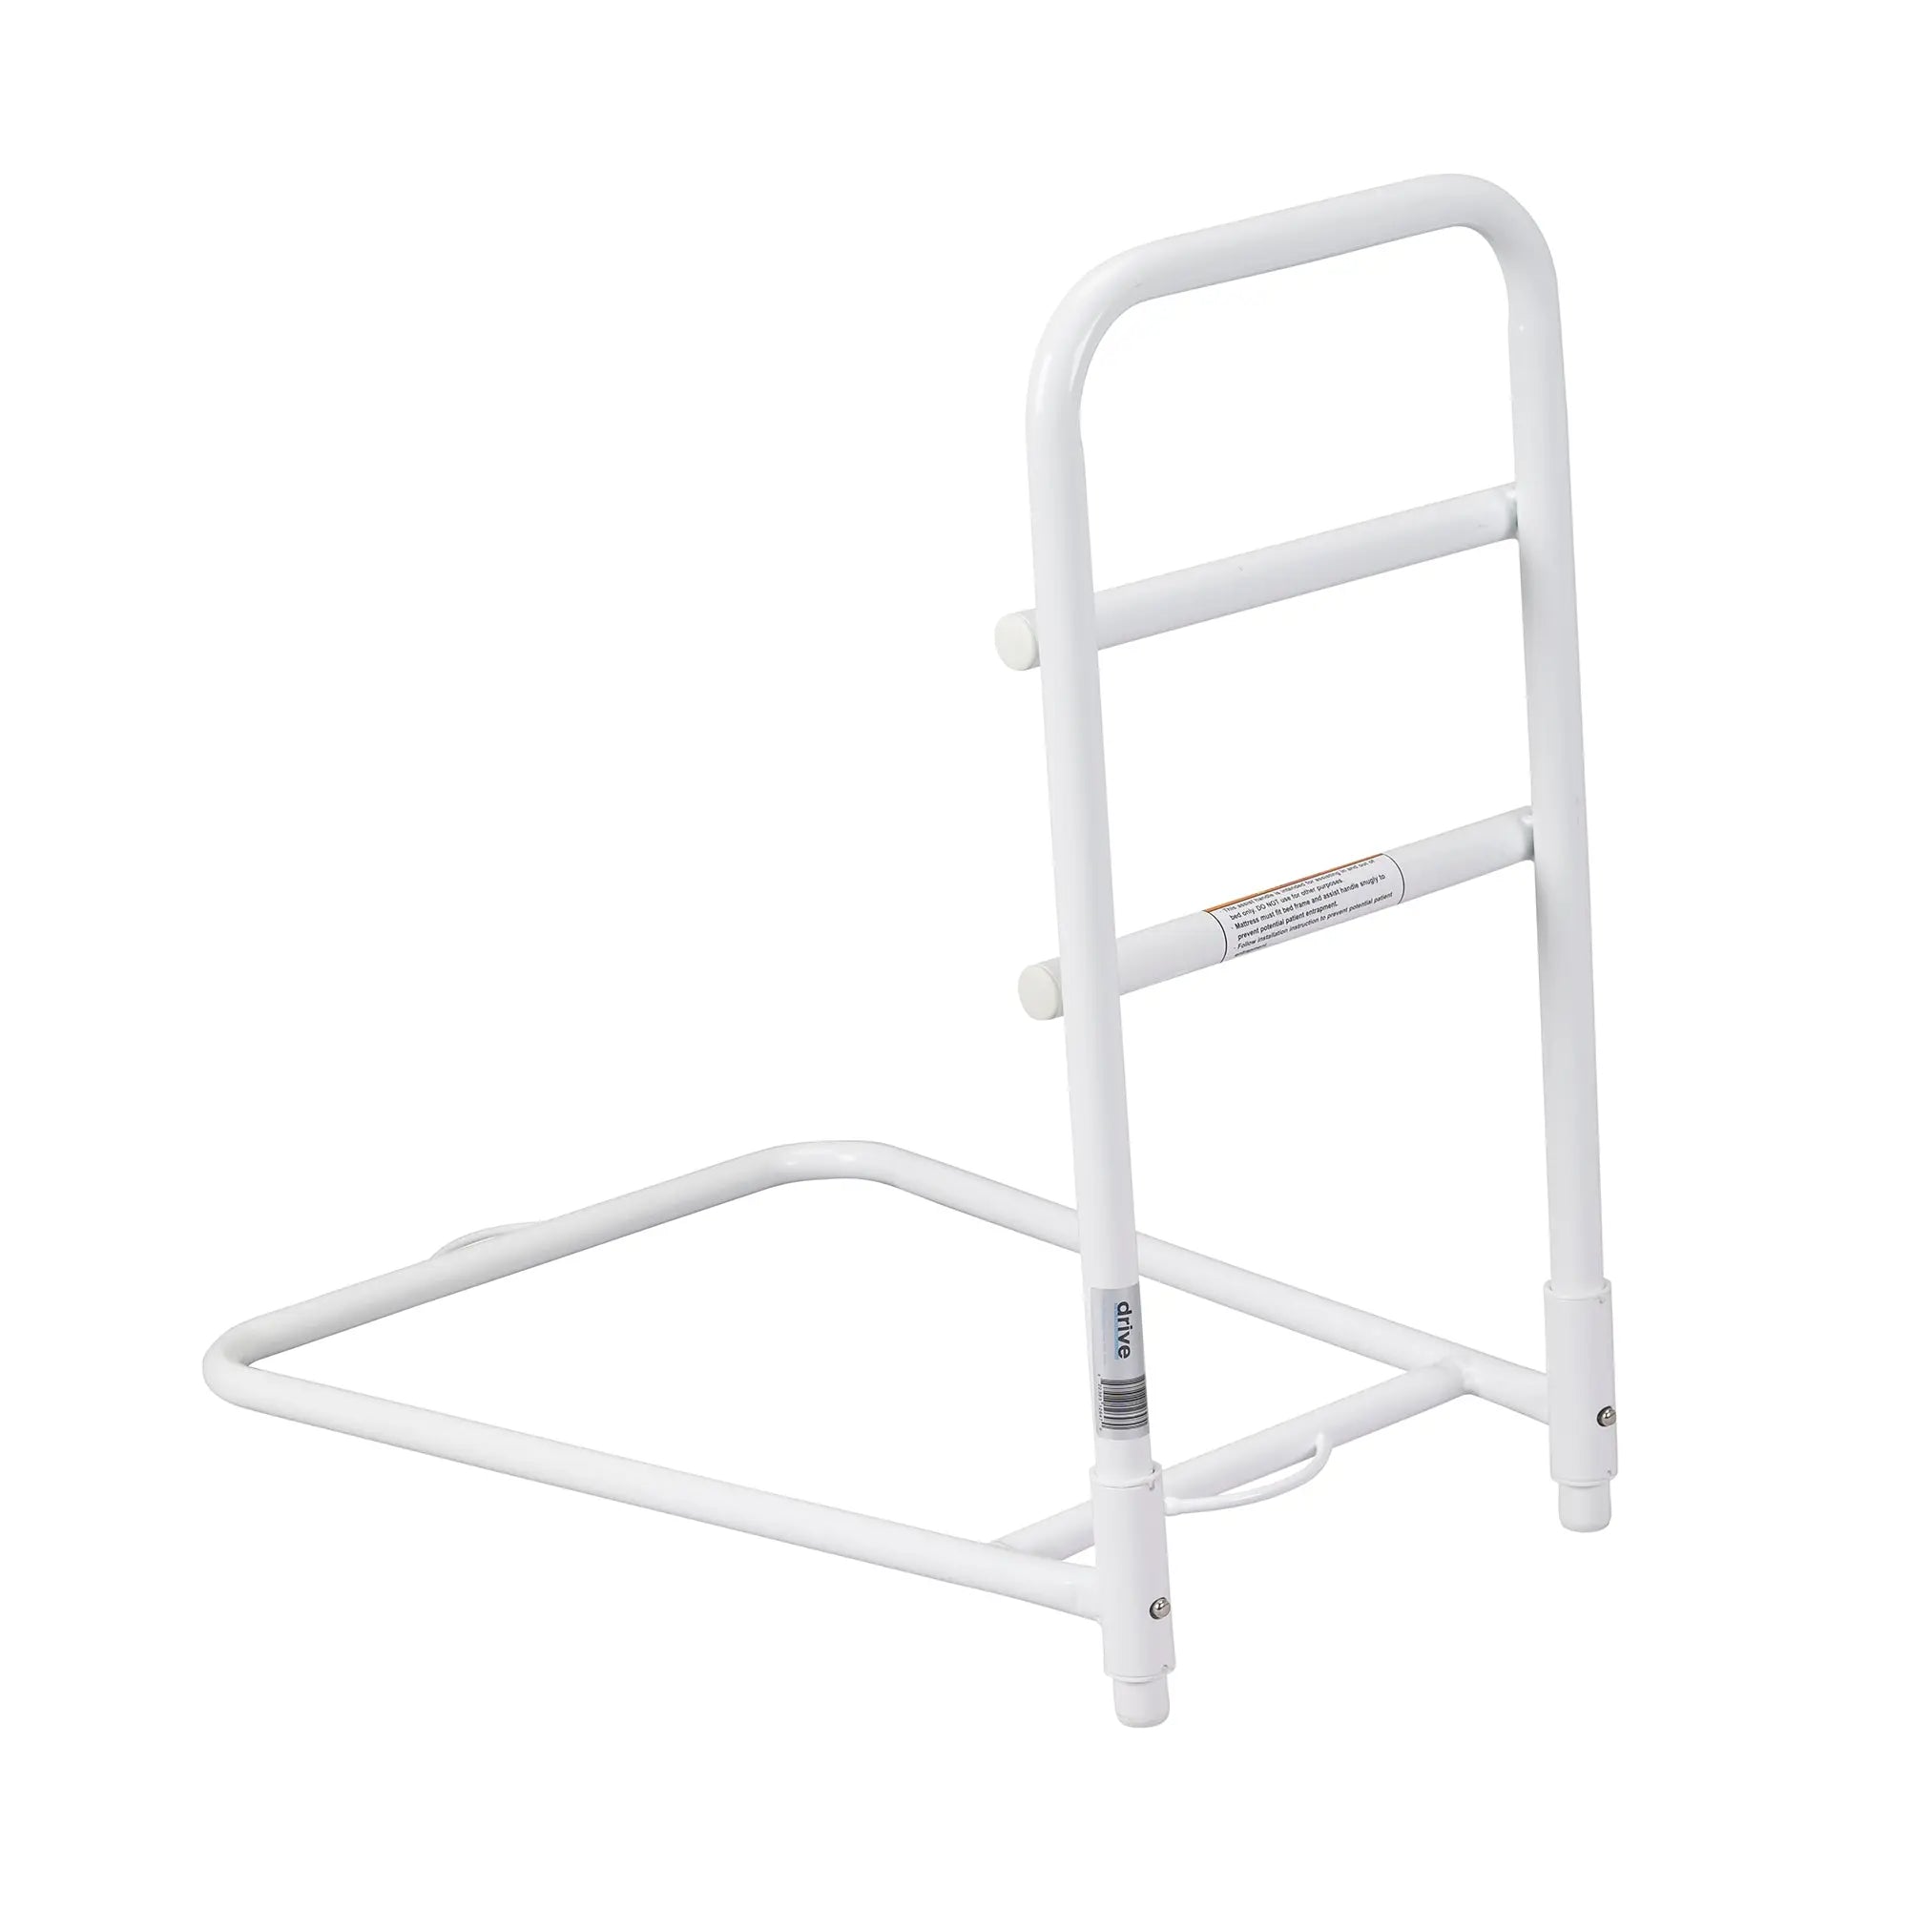 Home Bed Assist Rail - Home Health Store Inc